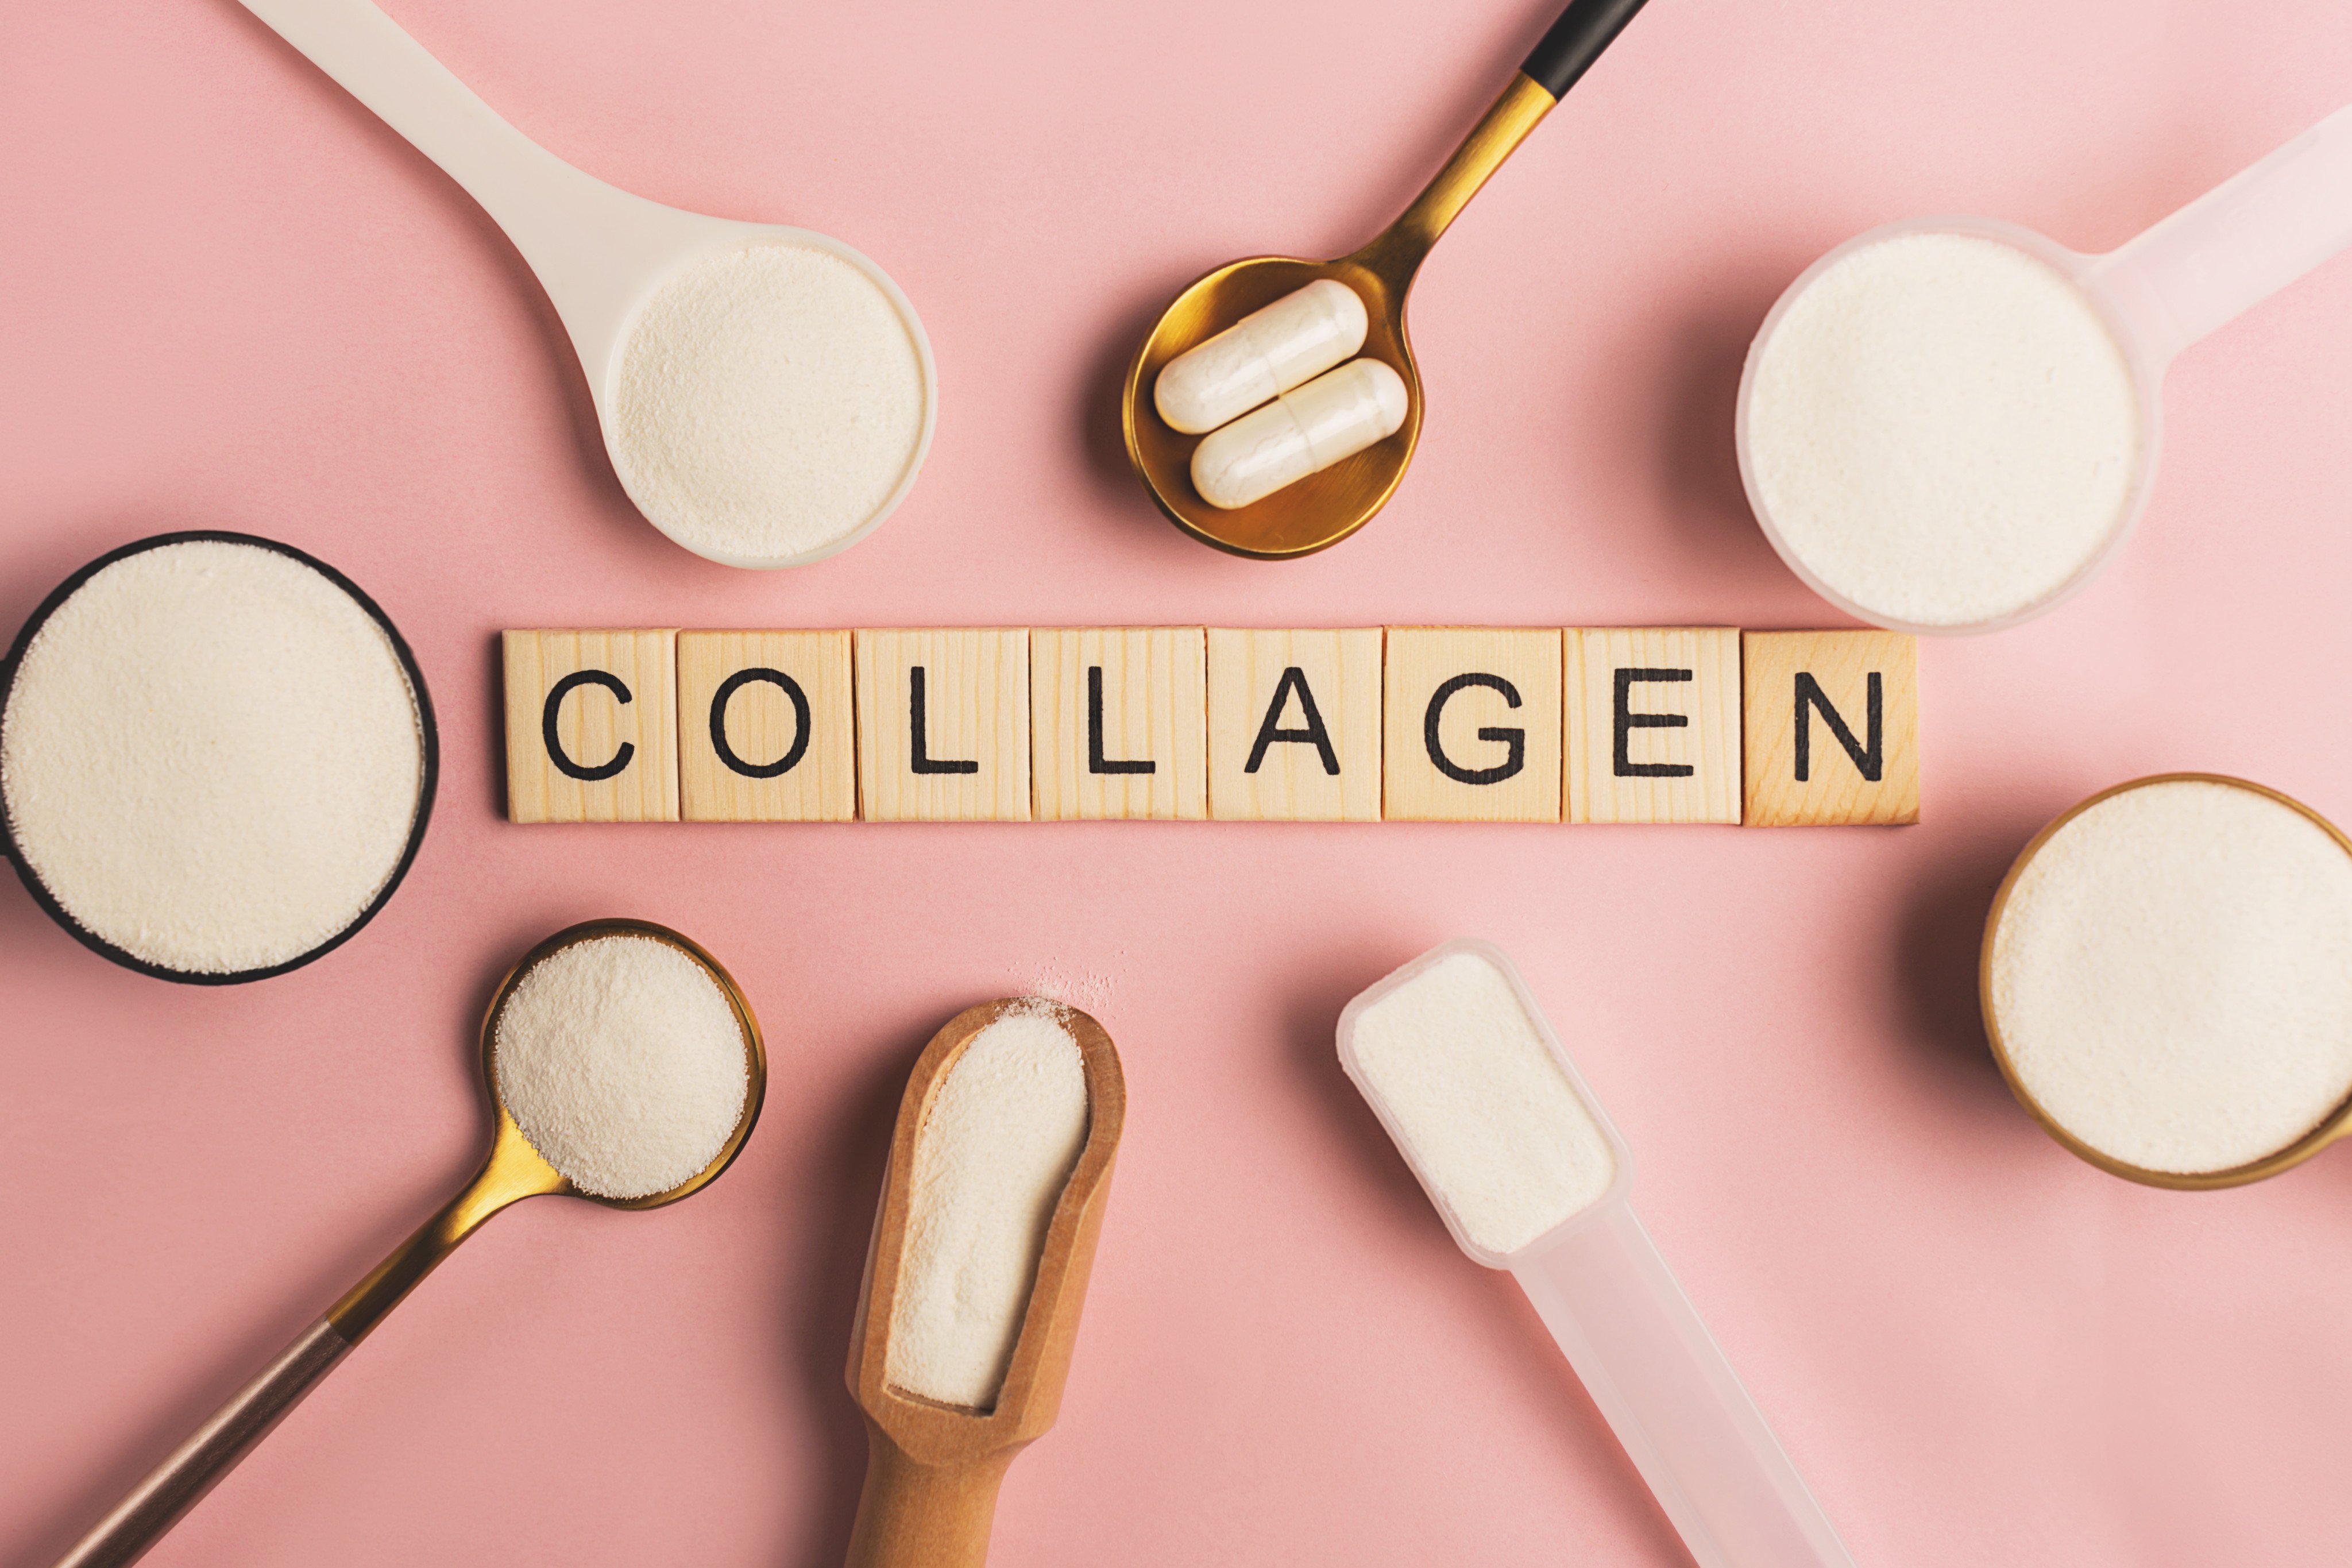 Collagen banking is the hot new skincare trend, but scientists are skeptical. Photo: Shutterstock